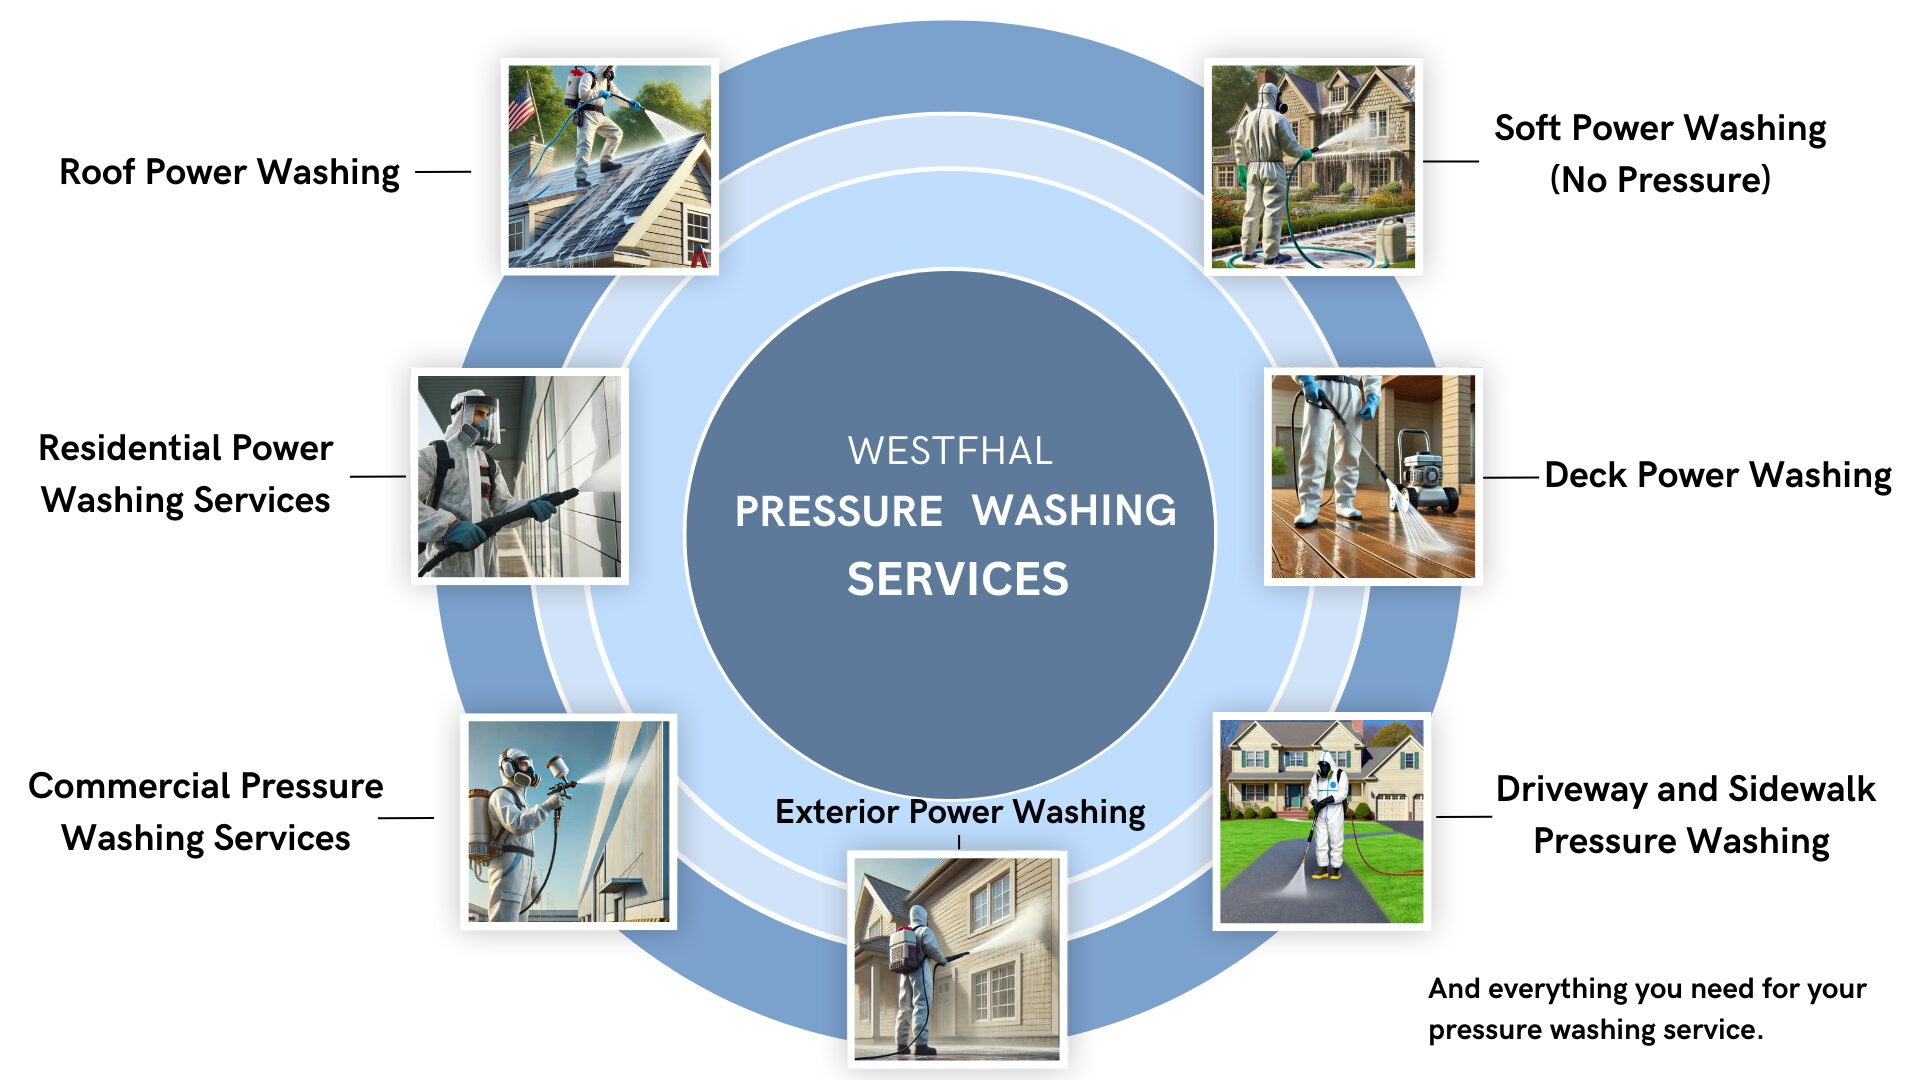 Overview of comprehensive power washing services